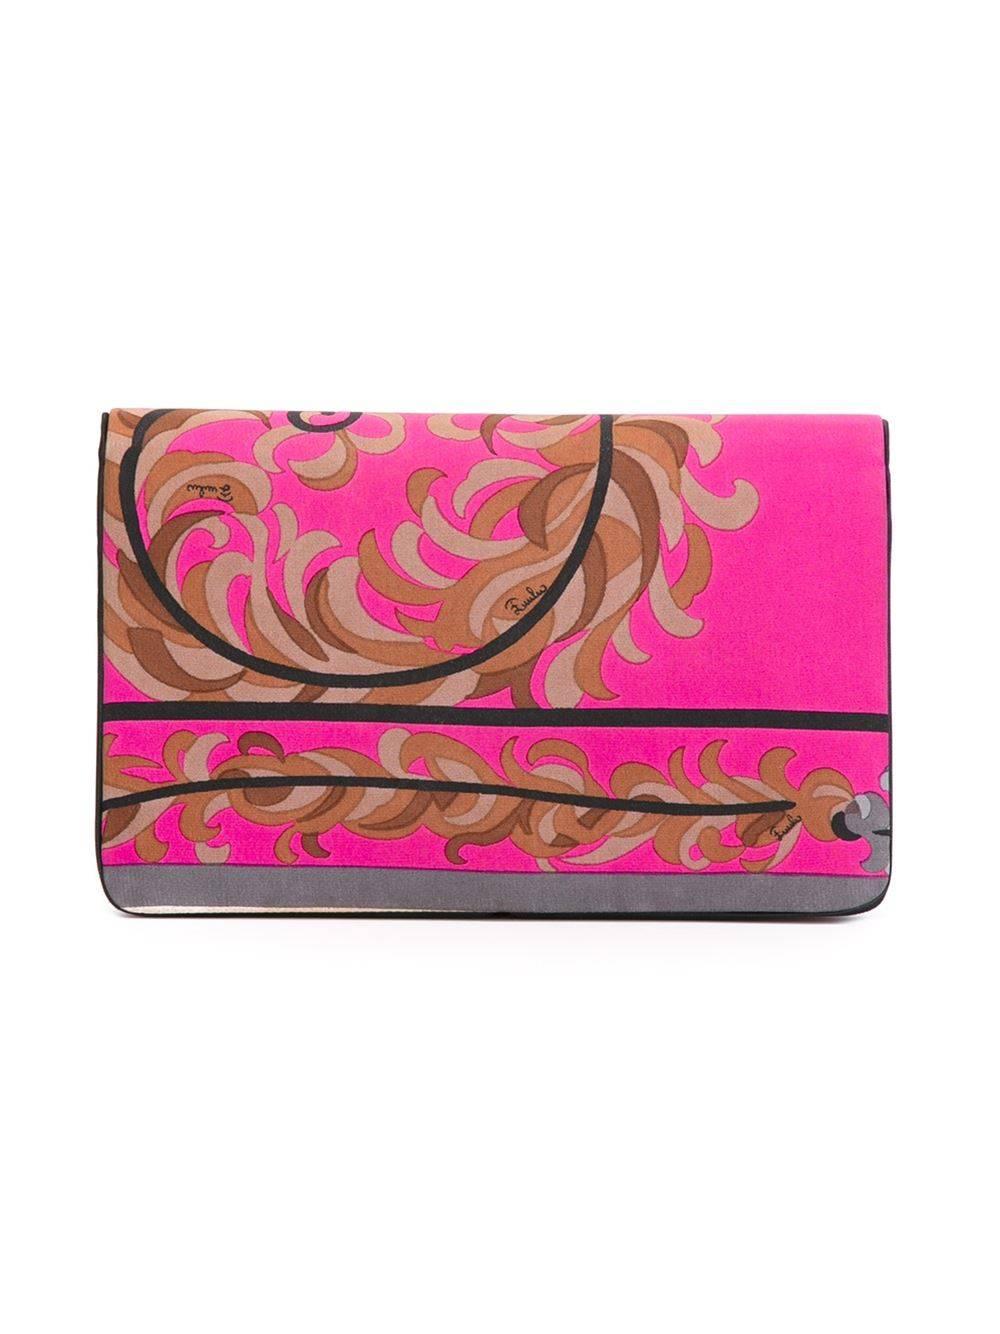 Fabulous and collectable Emilio Pucci silk flowers clutch. late 60s, early 70s. One of a kind in excellent vintage condition (no defect or use to specify). 

Size: 20 x 12 x 3 cm. 